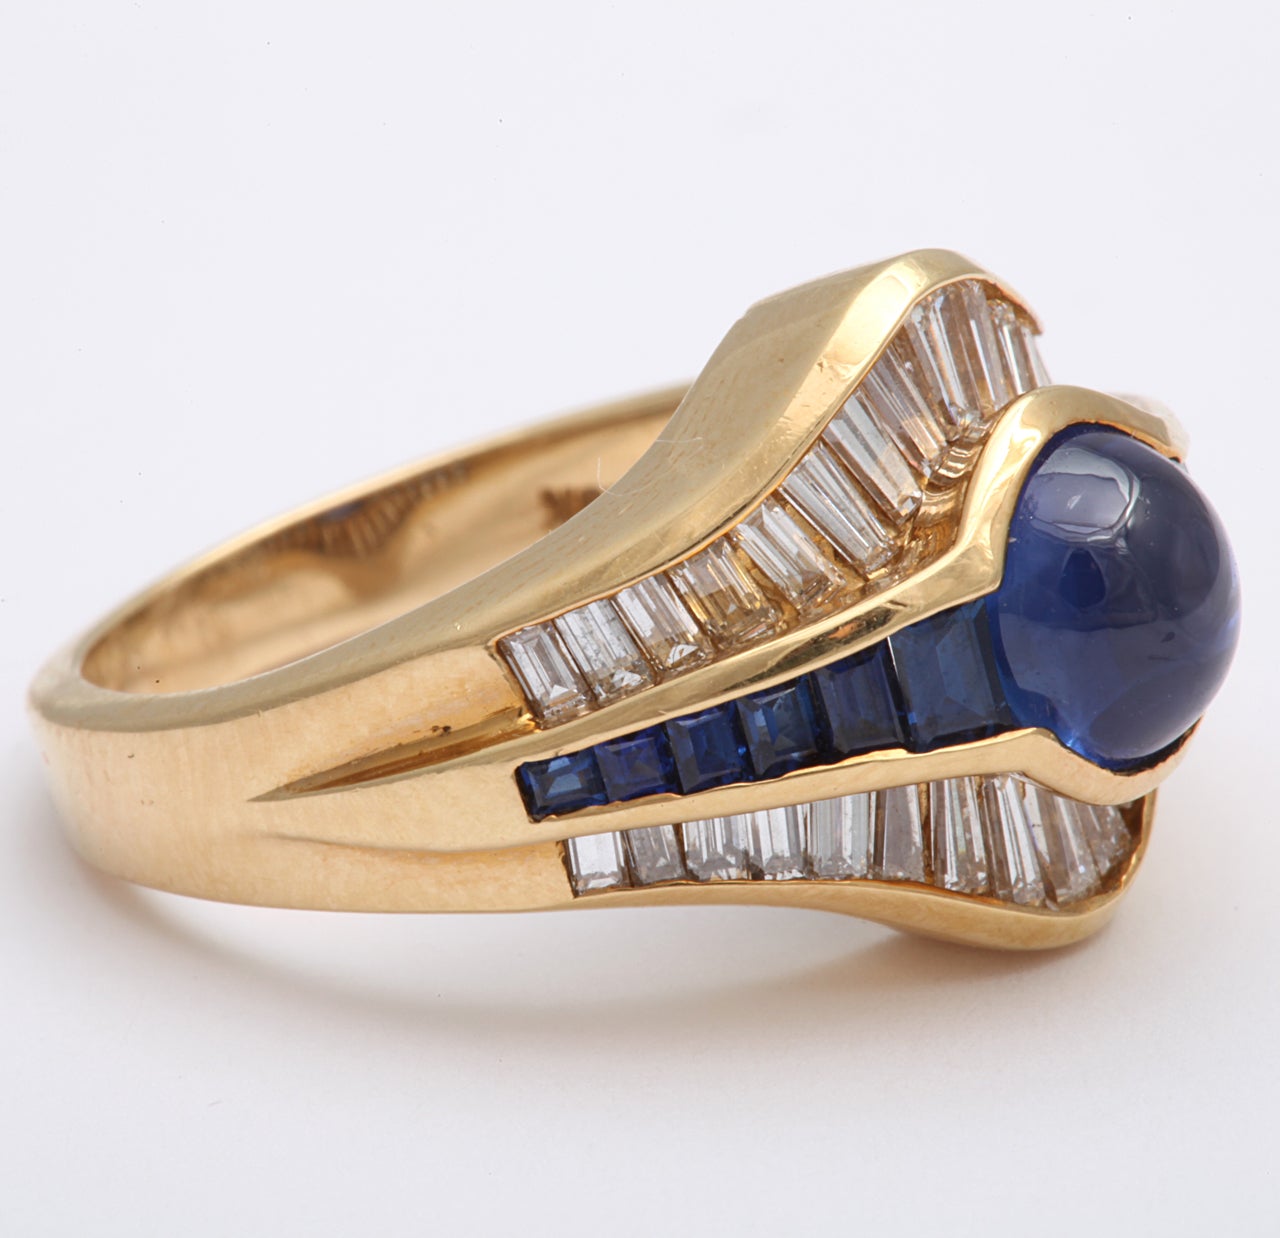 cabochon sapphire and diamond ring